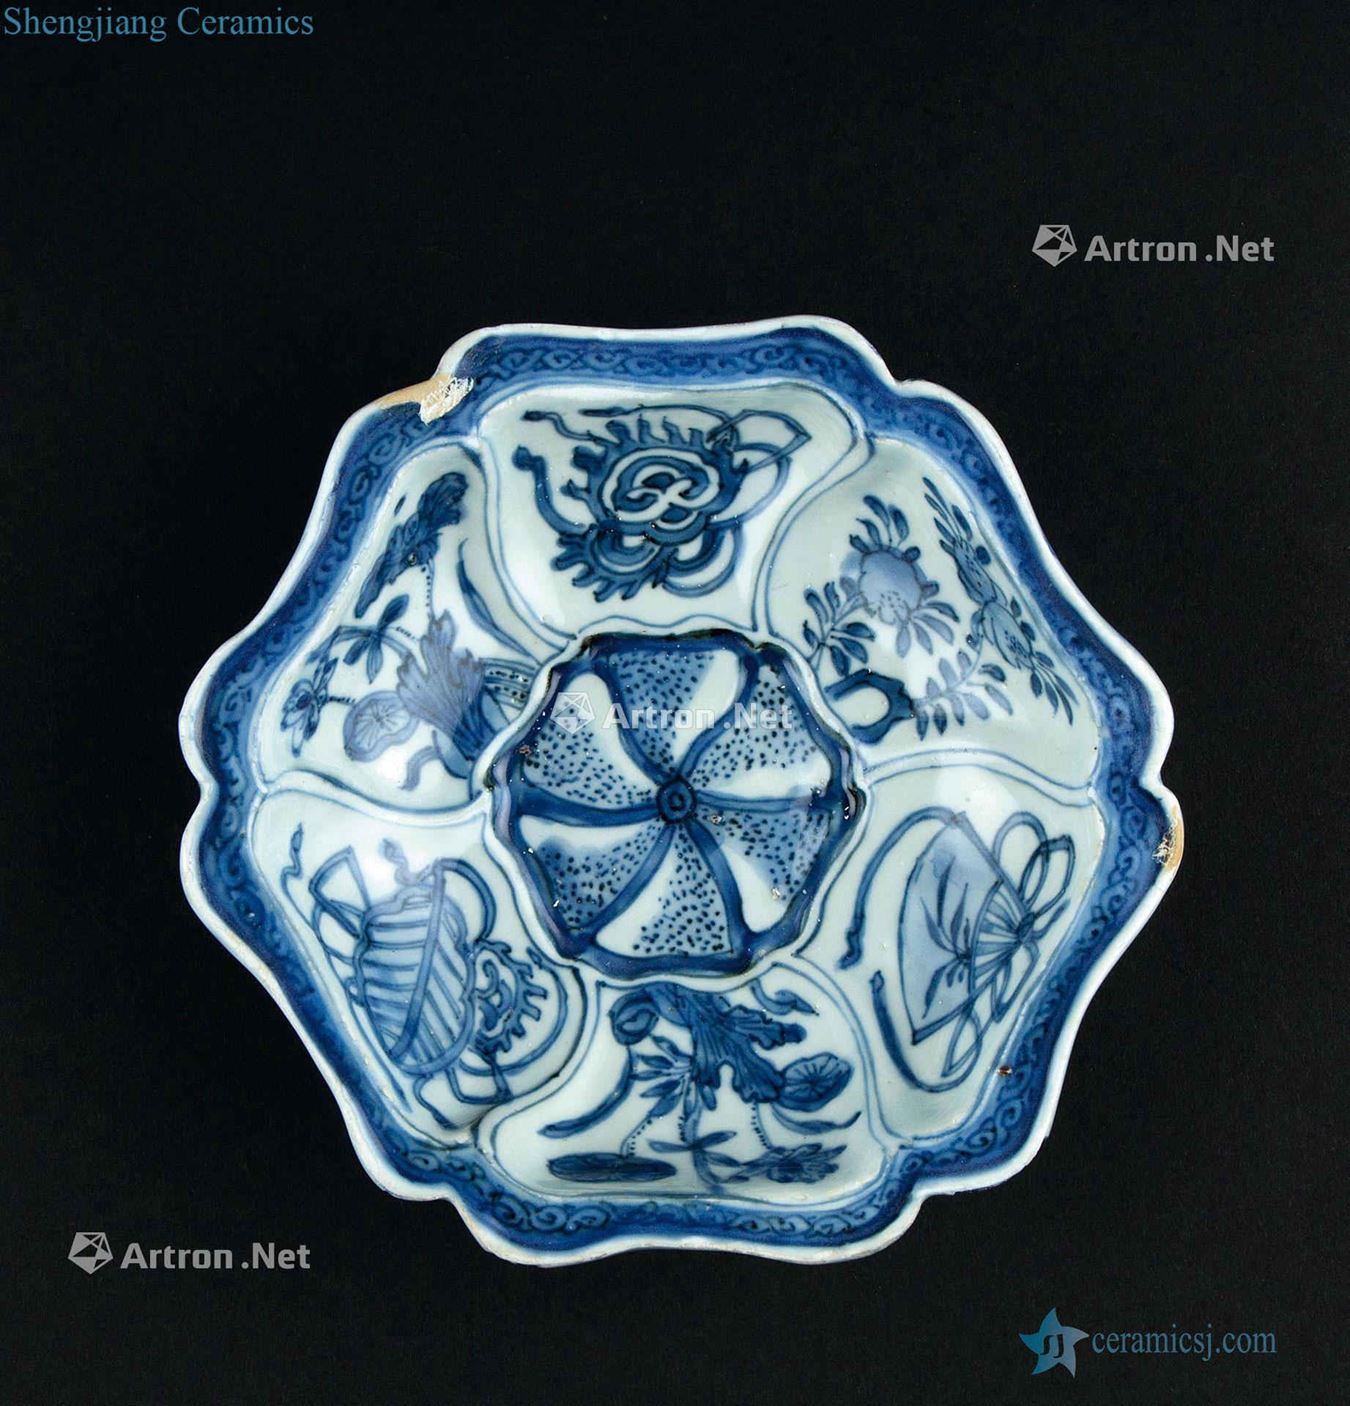 Ming dynasty (1368-1644) blue and white flower pattern plate edges